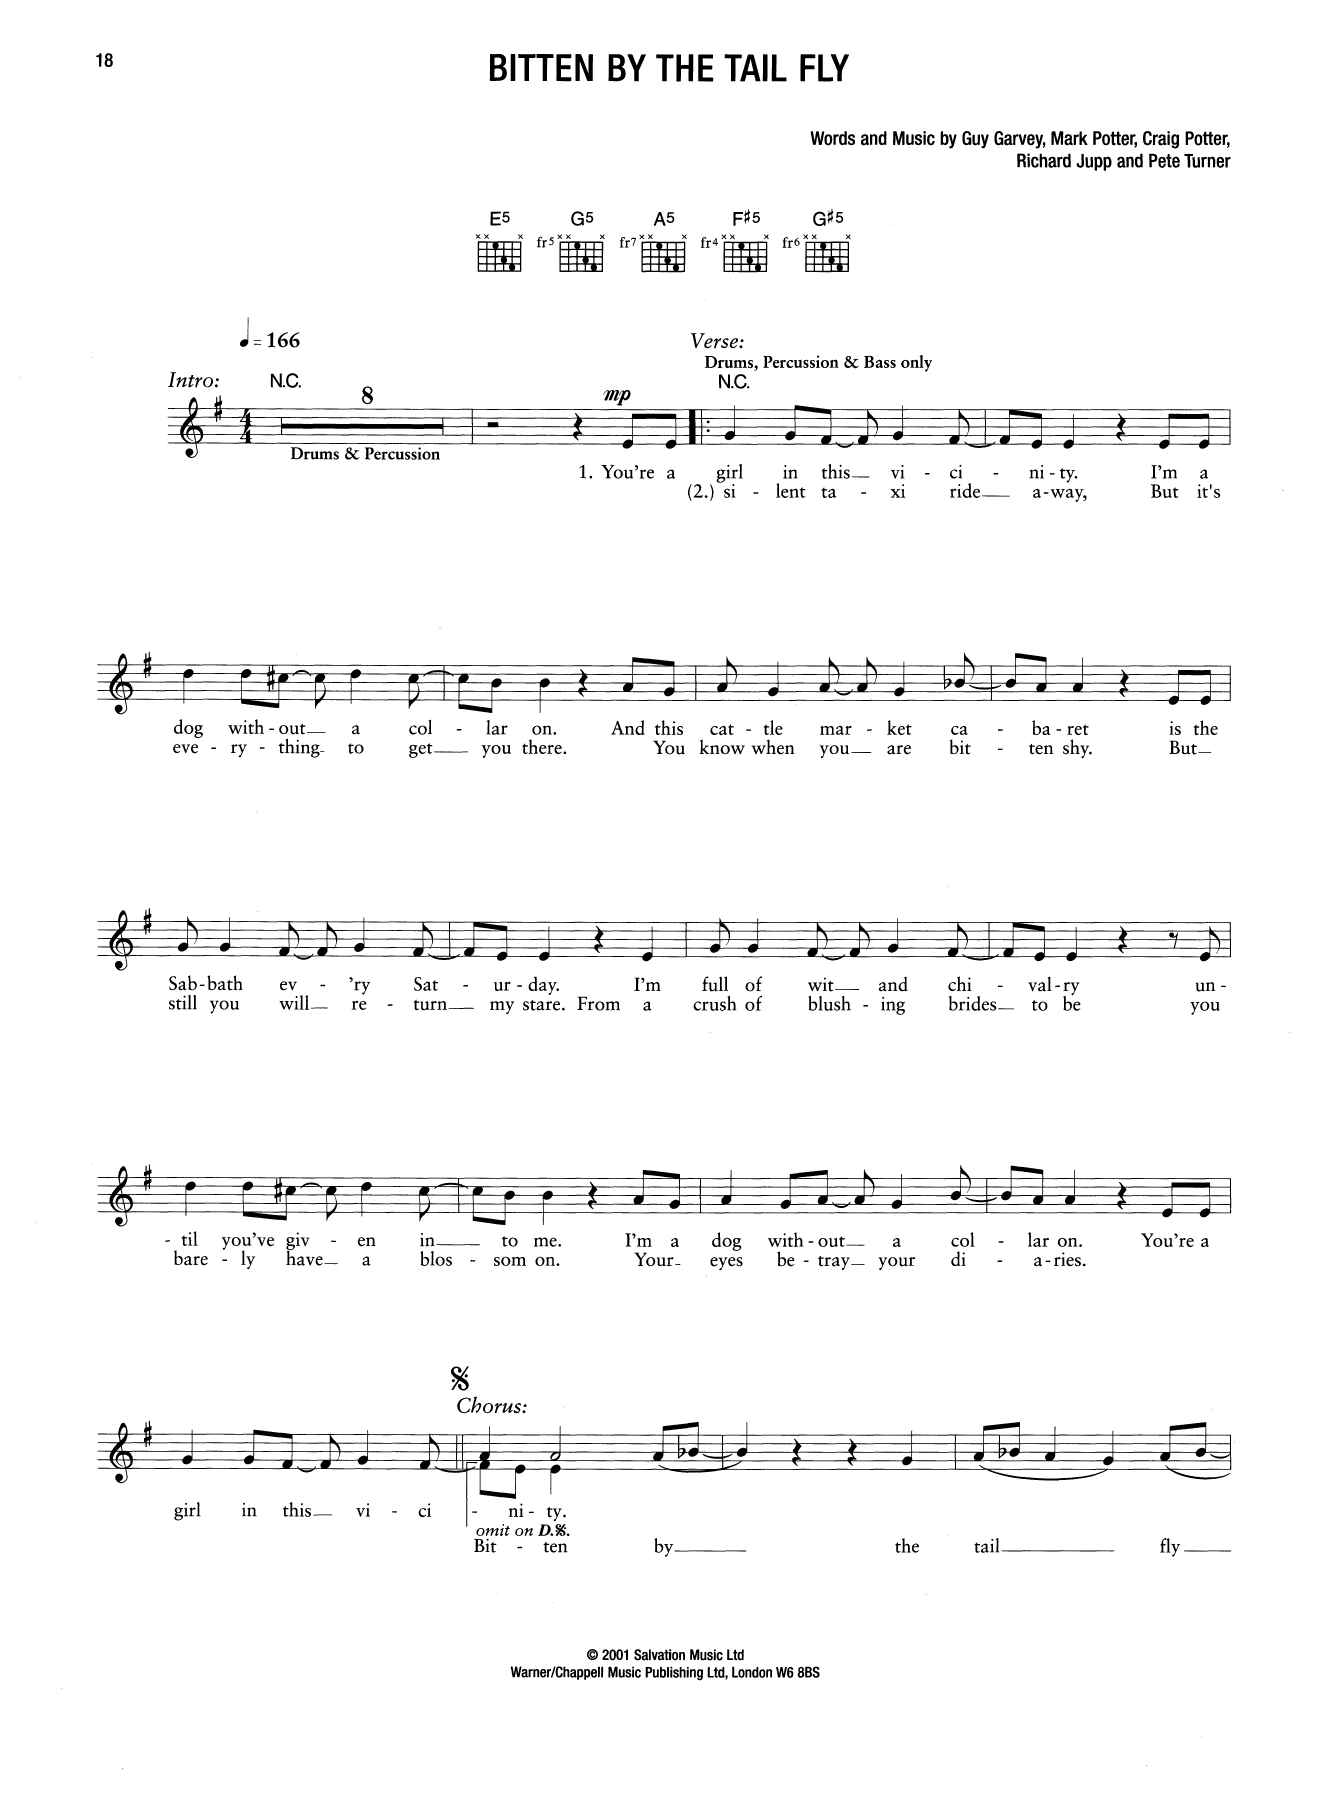 Download Elbow Bitten By The Tail Fly Sheet Music